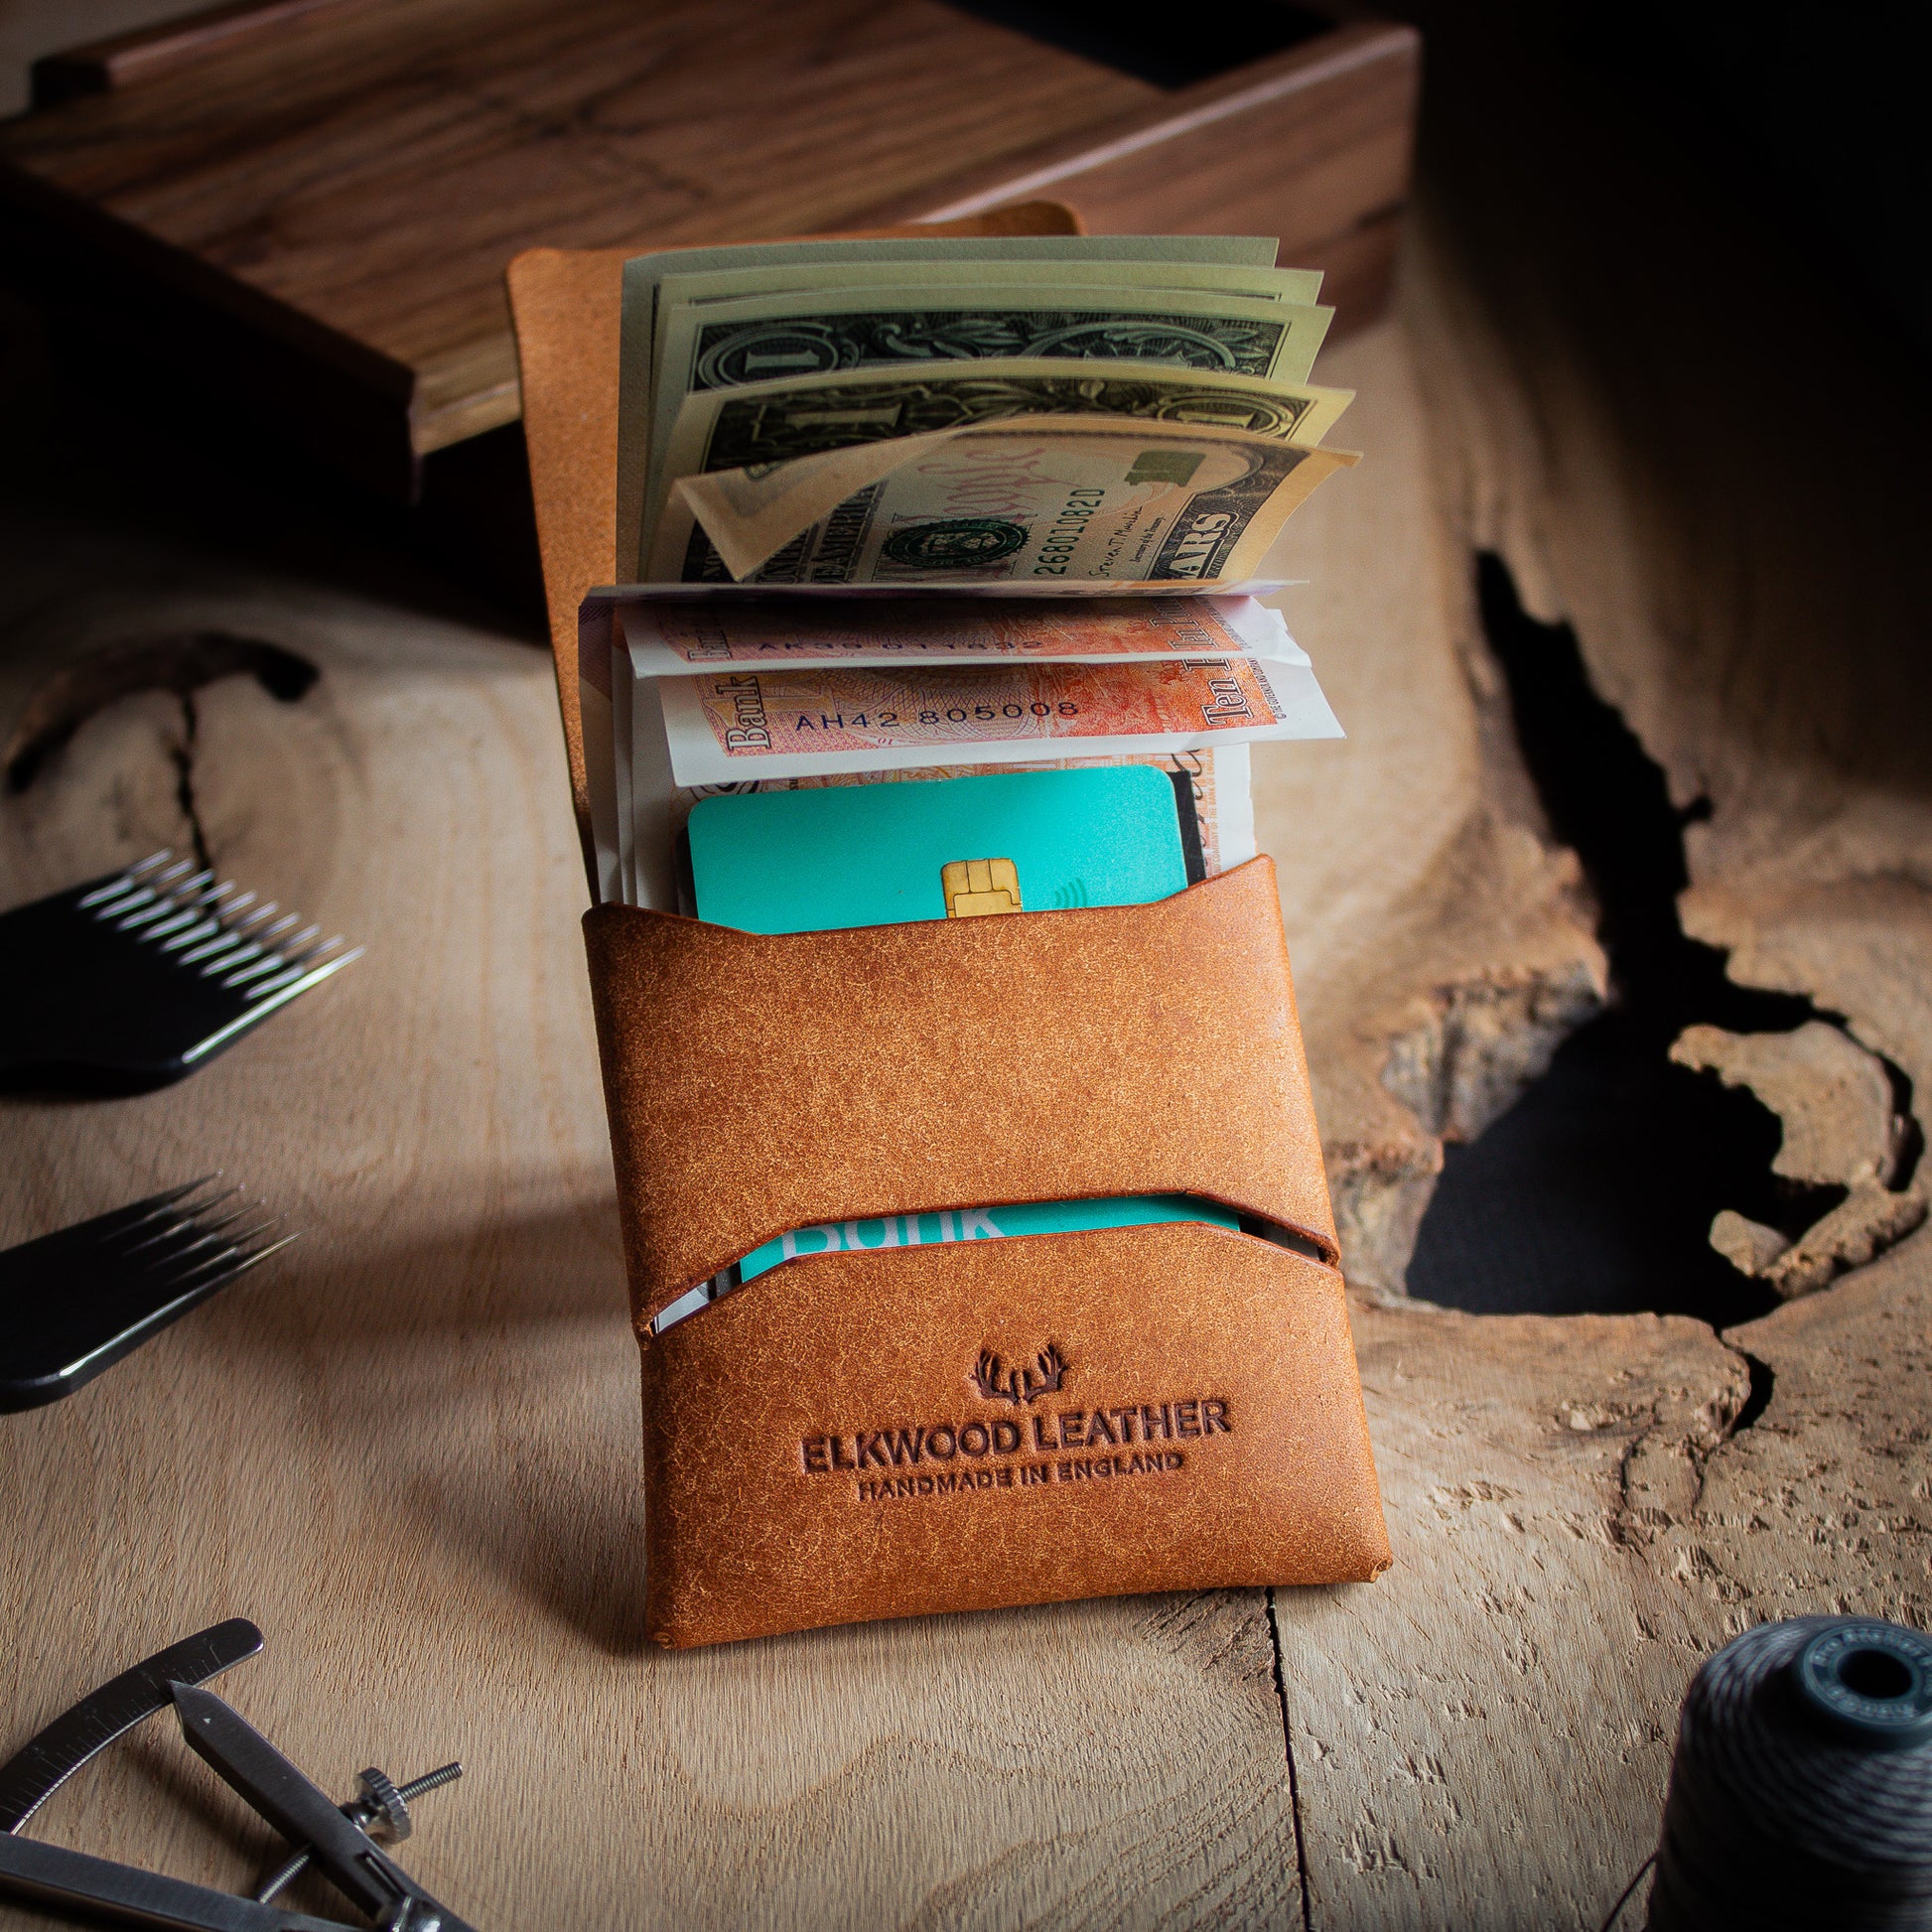 EDC Leather stitchless wallet - closed open with UK Pound and US dollar on wooden table with leathercraft tools